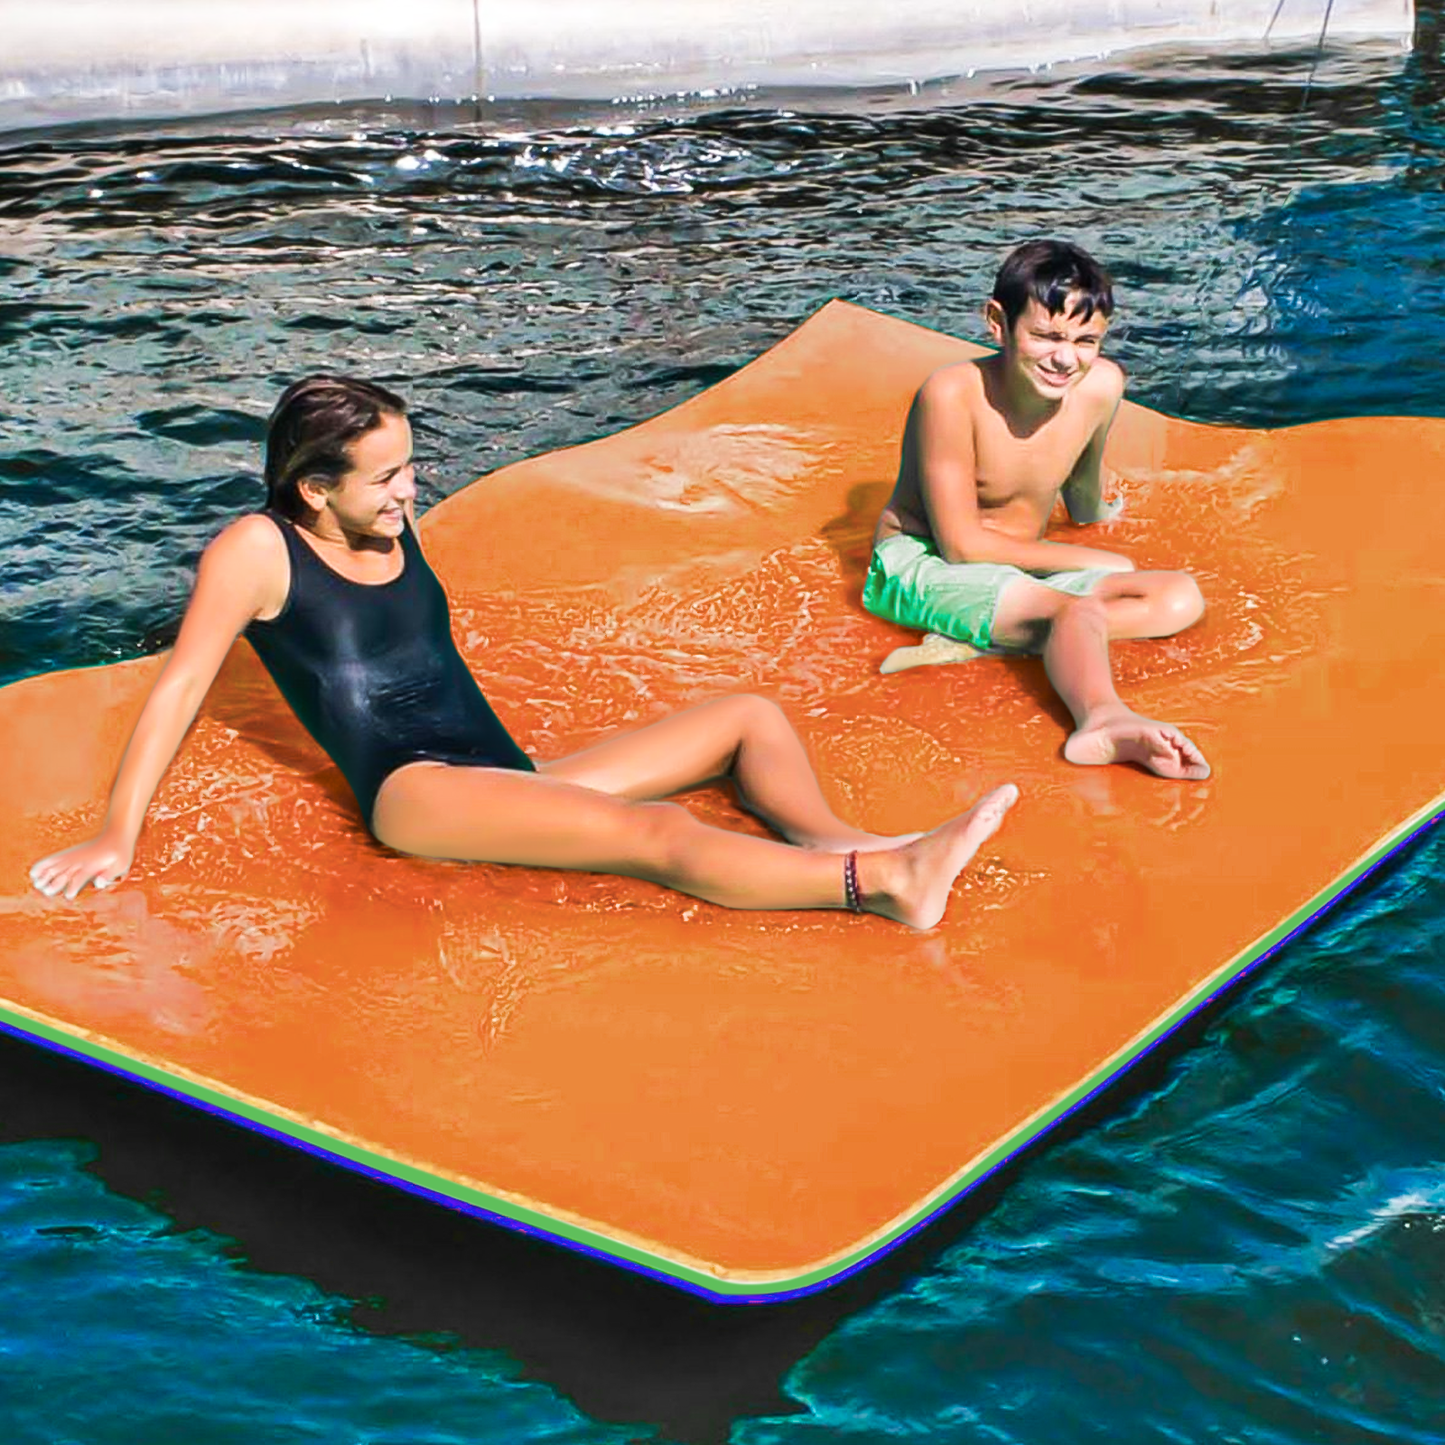 7 * 6 ft Water Floating Mat